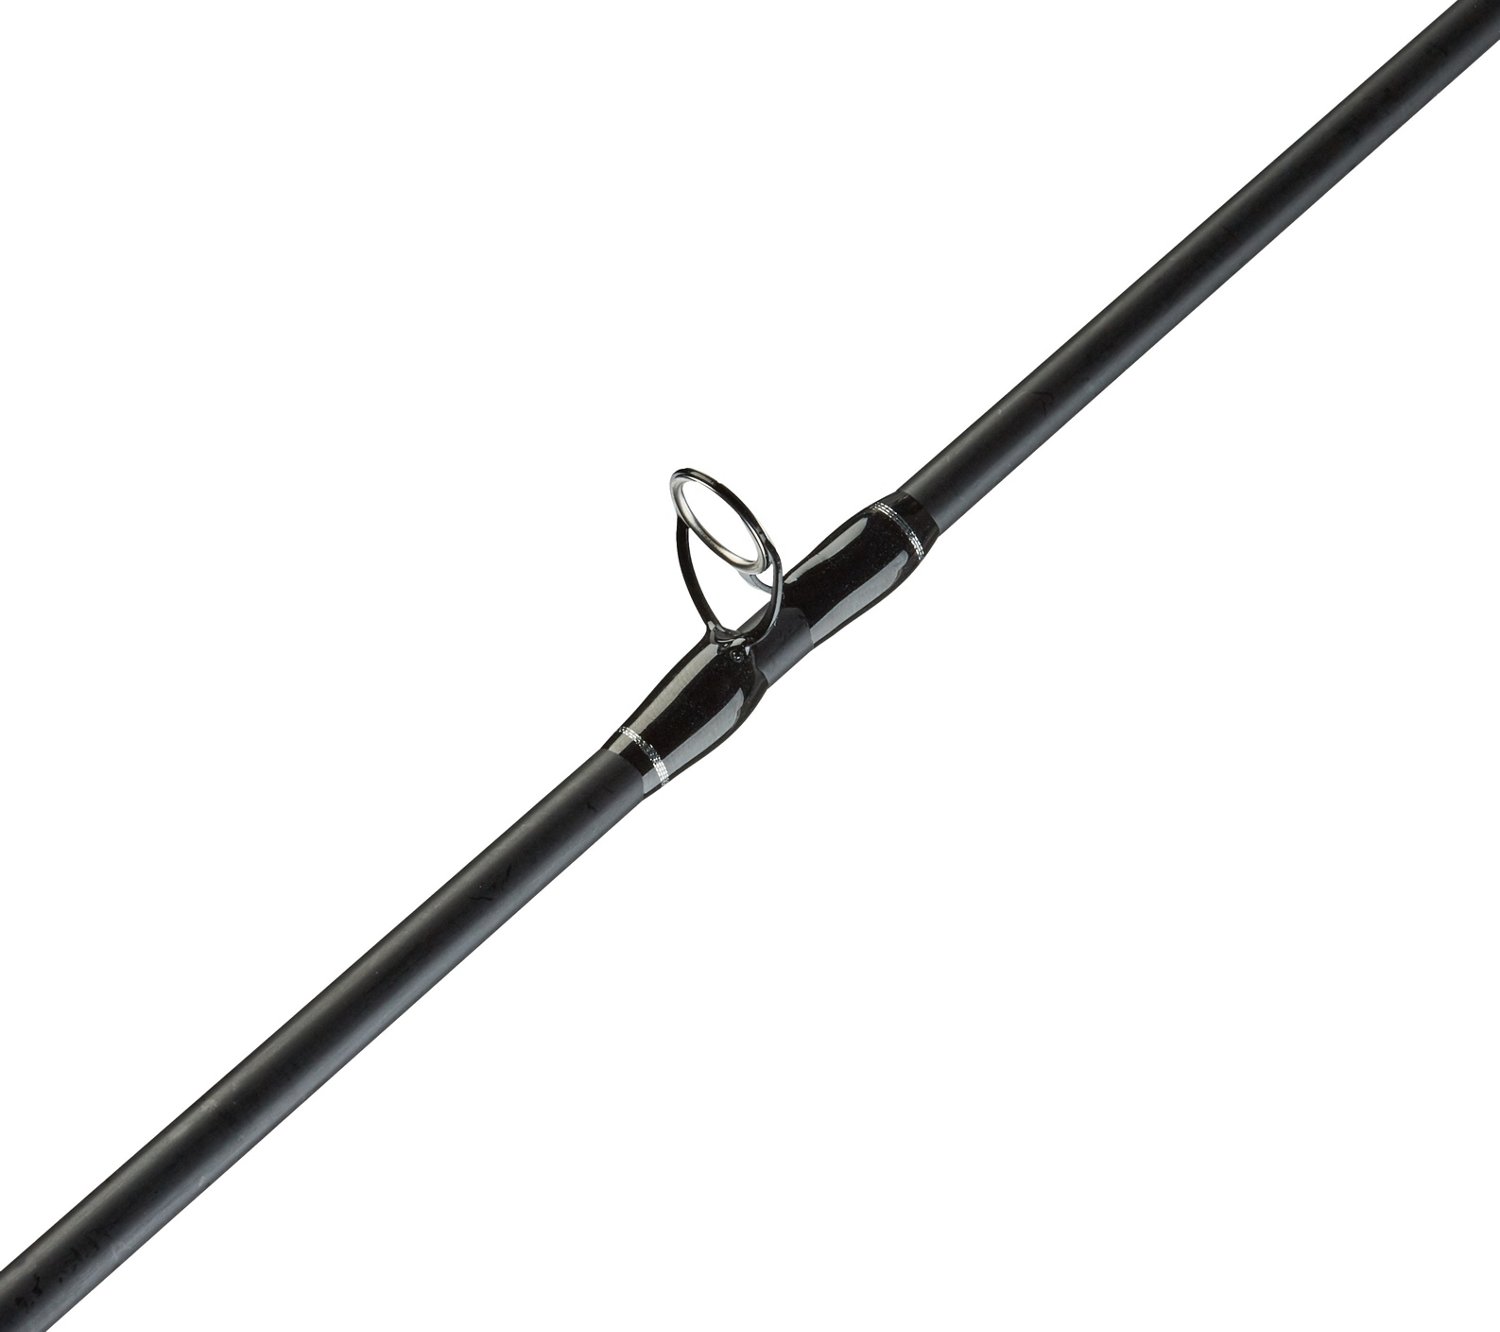 Zebco 33 Micro Spincast 5'0 Fishing Rod and Reel Combo Ultralight